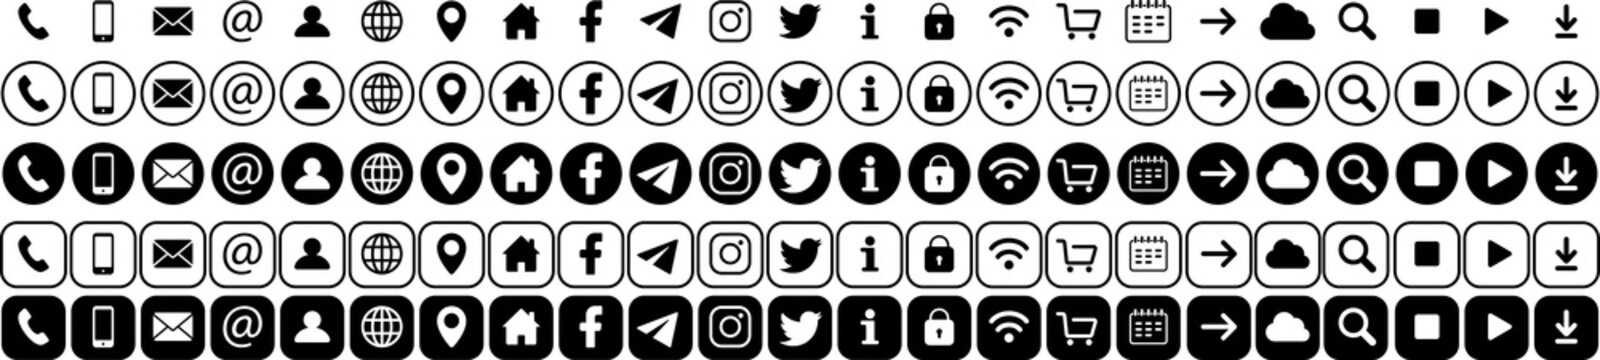 Contacts vector icons, social icons in black color flat style. Icons with round and square strokes. Icons for your design on transparent background. PNG image